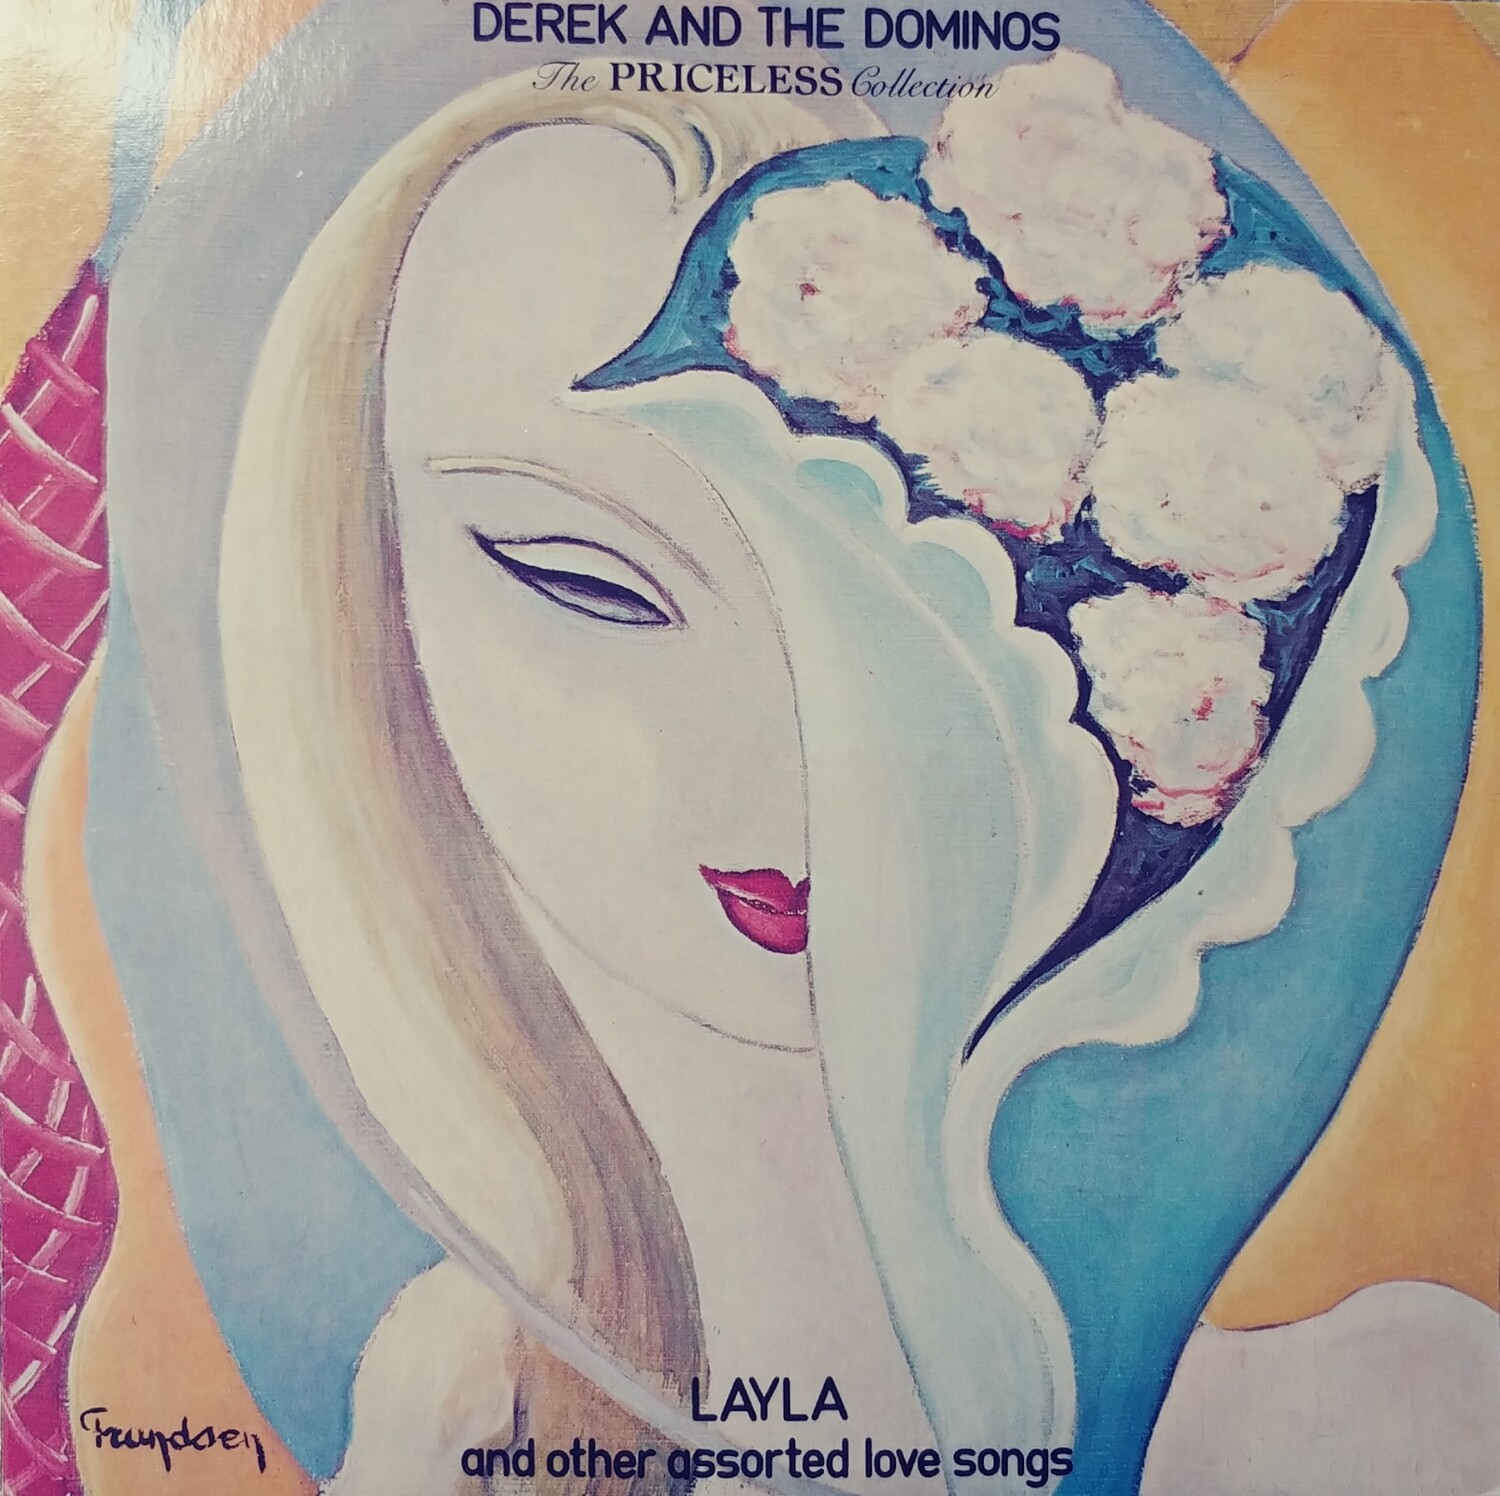 Derek and The Dominos - Layla and other assorted love songs